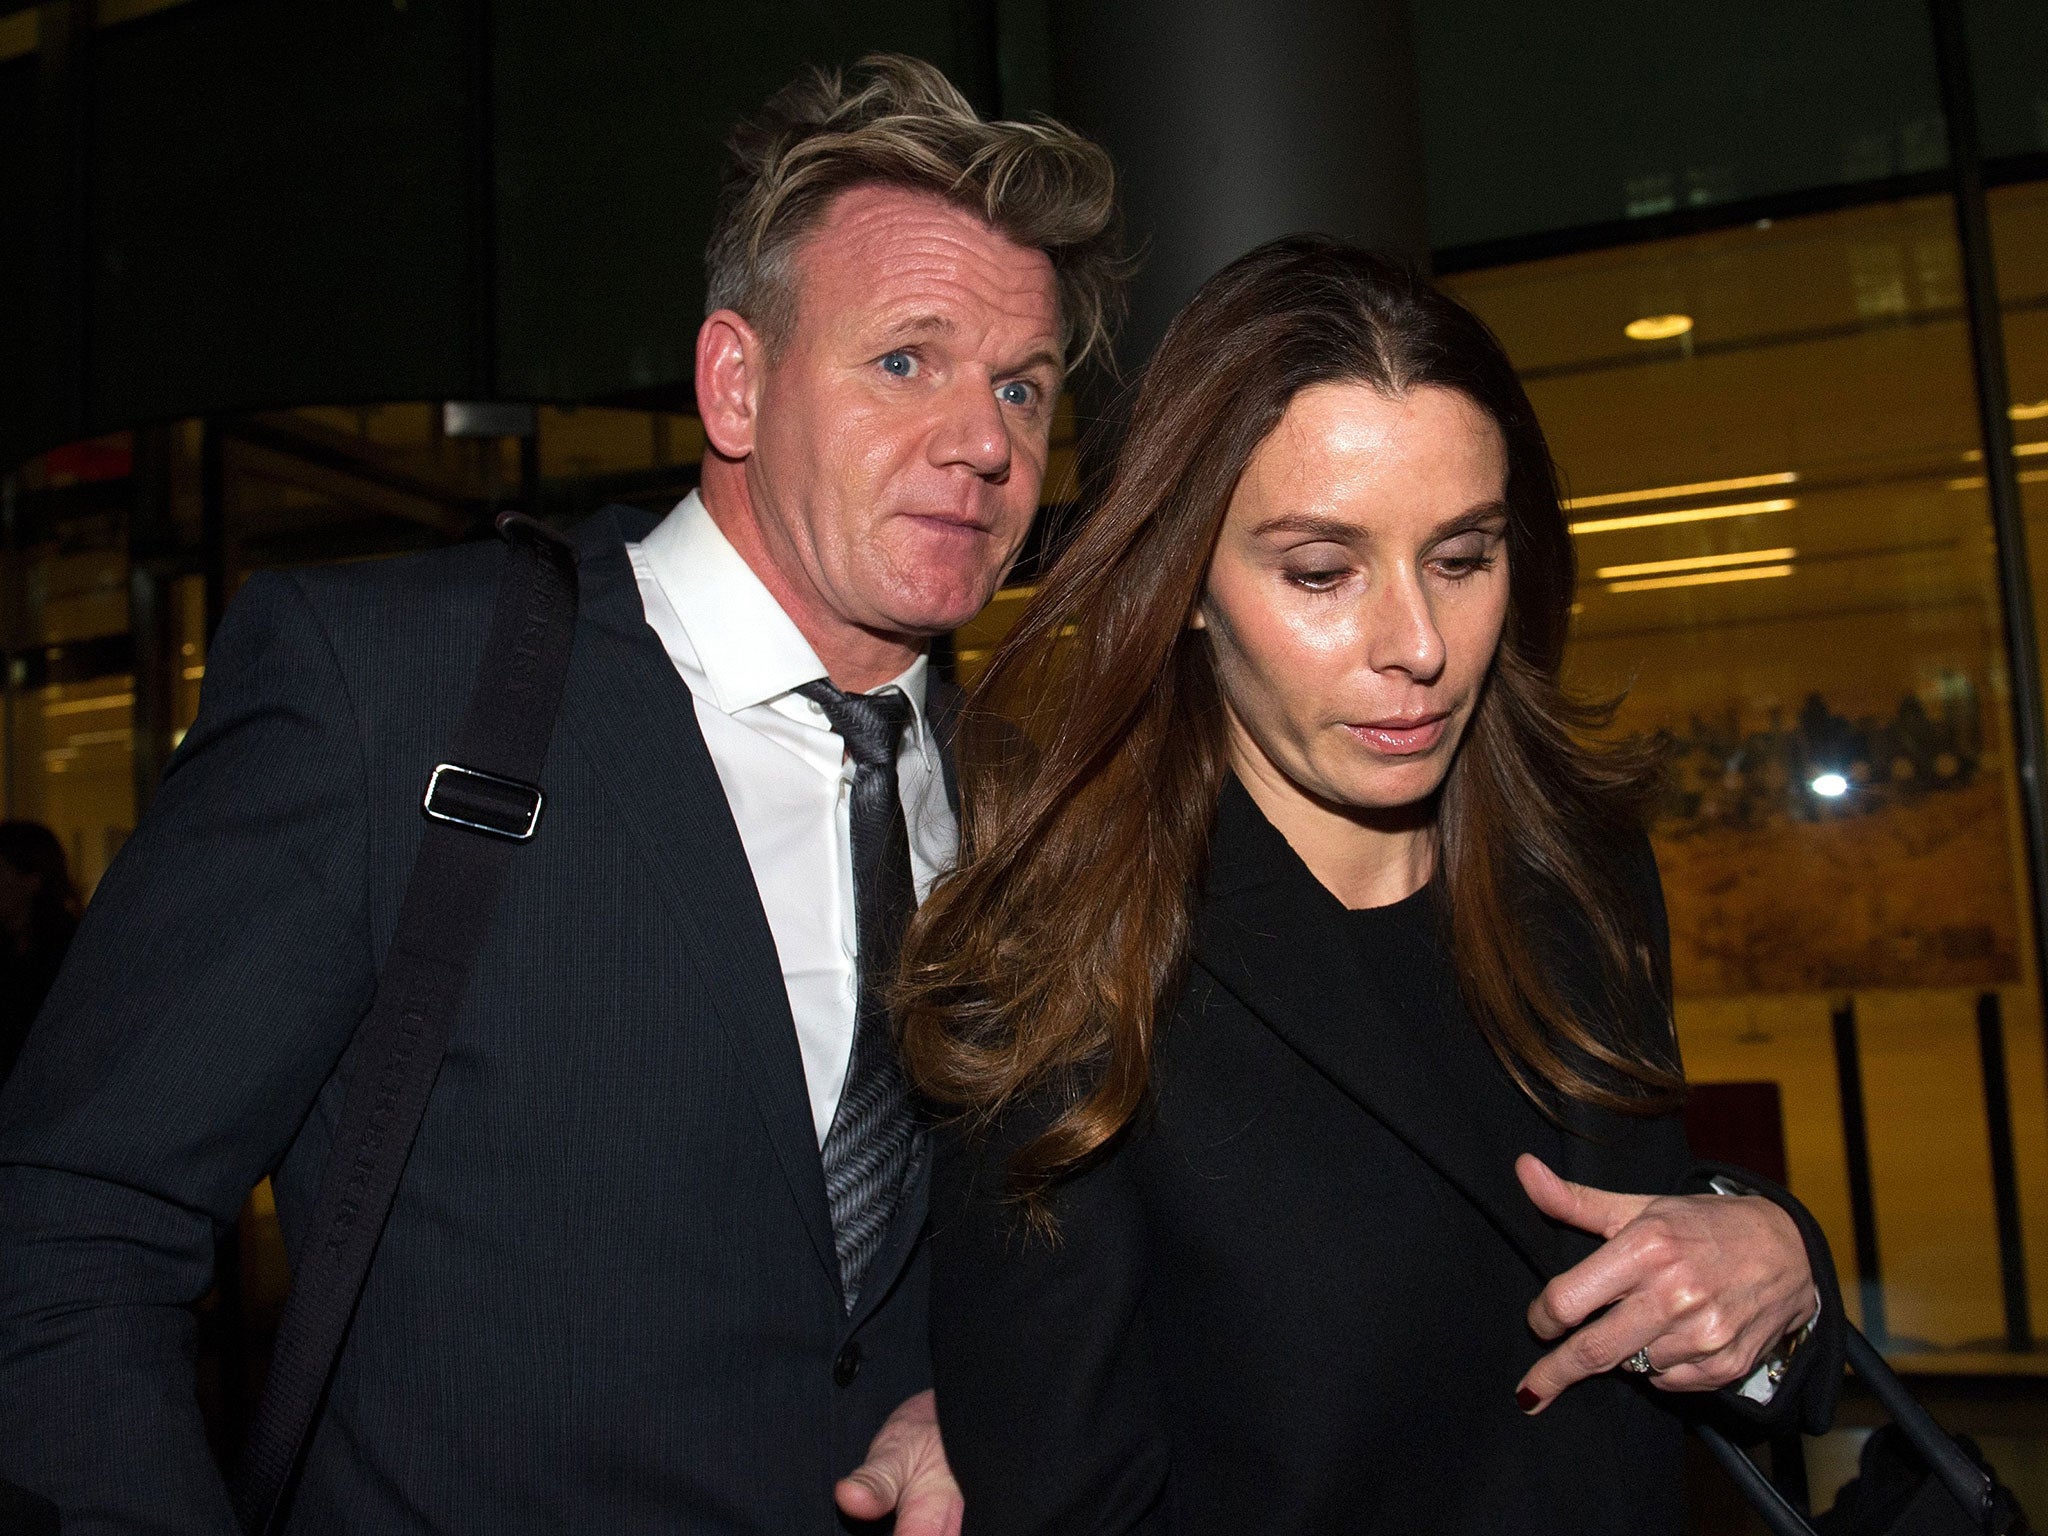 Tana Ramsay gave evidence in a legal action in which her husband, Gordon, is accusing her father, Christopher Hutcheson, of using a ghost writer machine to “forge” his signature